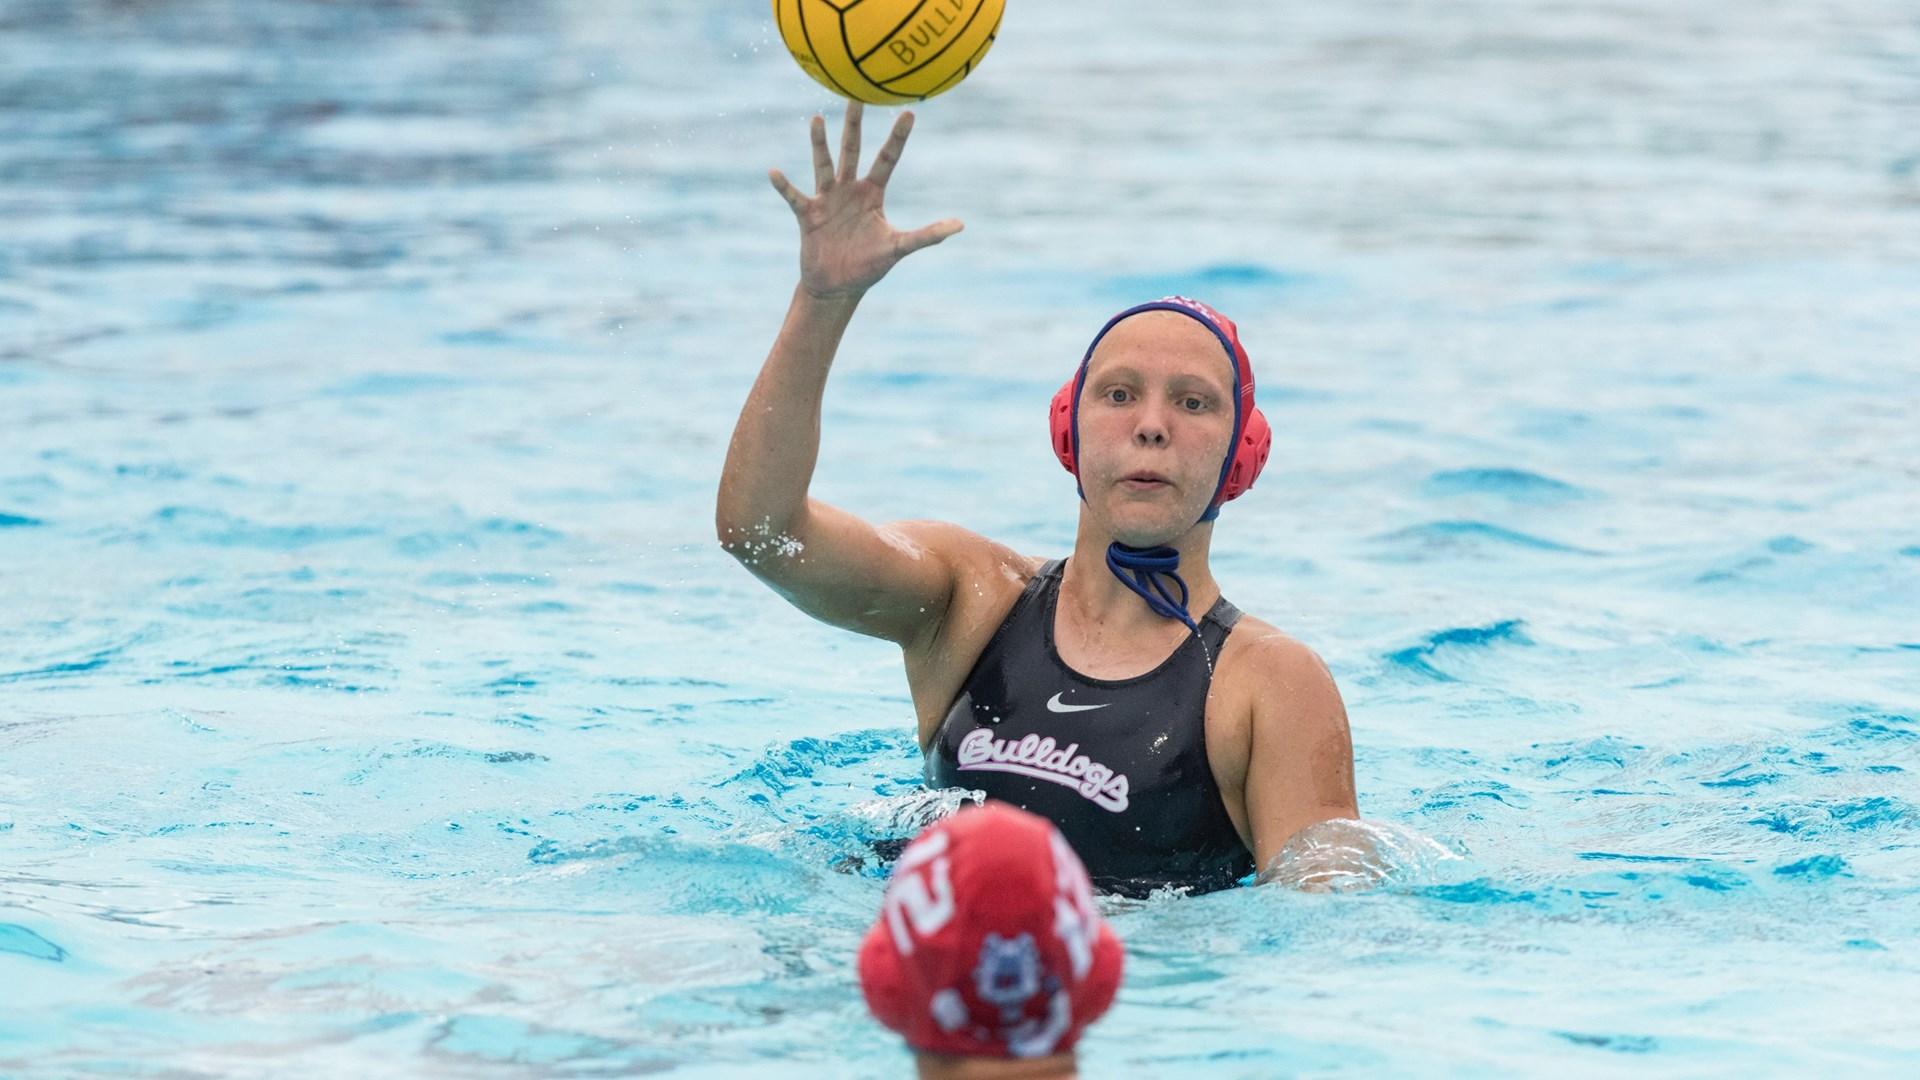 The Water ‘Dogs’ regular season ends with a 6-5 win over No. 22 Cal Baptist on April 21, 2018 at Lancer Aquatic Center. (Fresno State Athletics) 